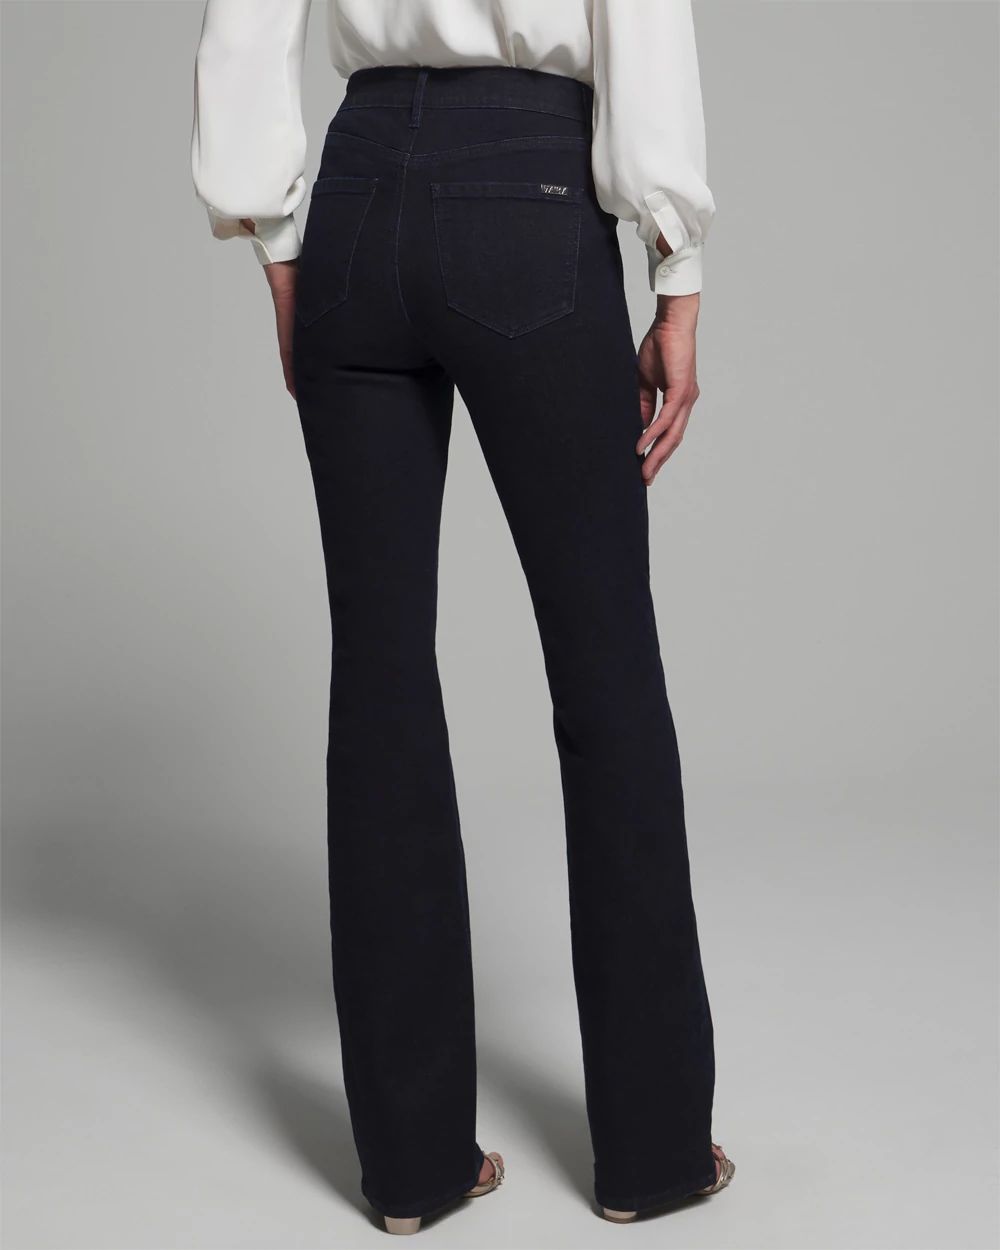 Outlet WHBM High Rise Cargo Skinny Flare Jean click to view larger image.